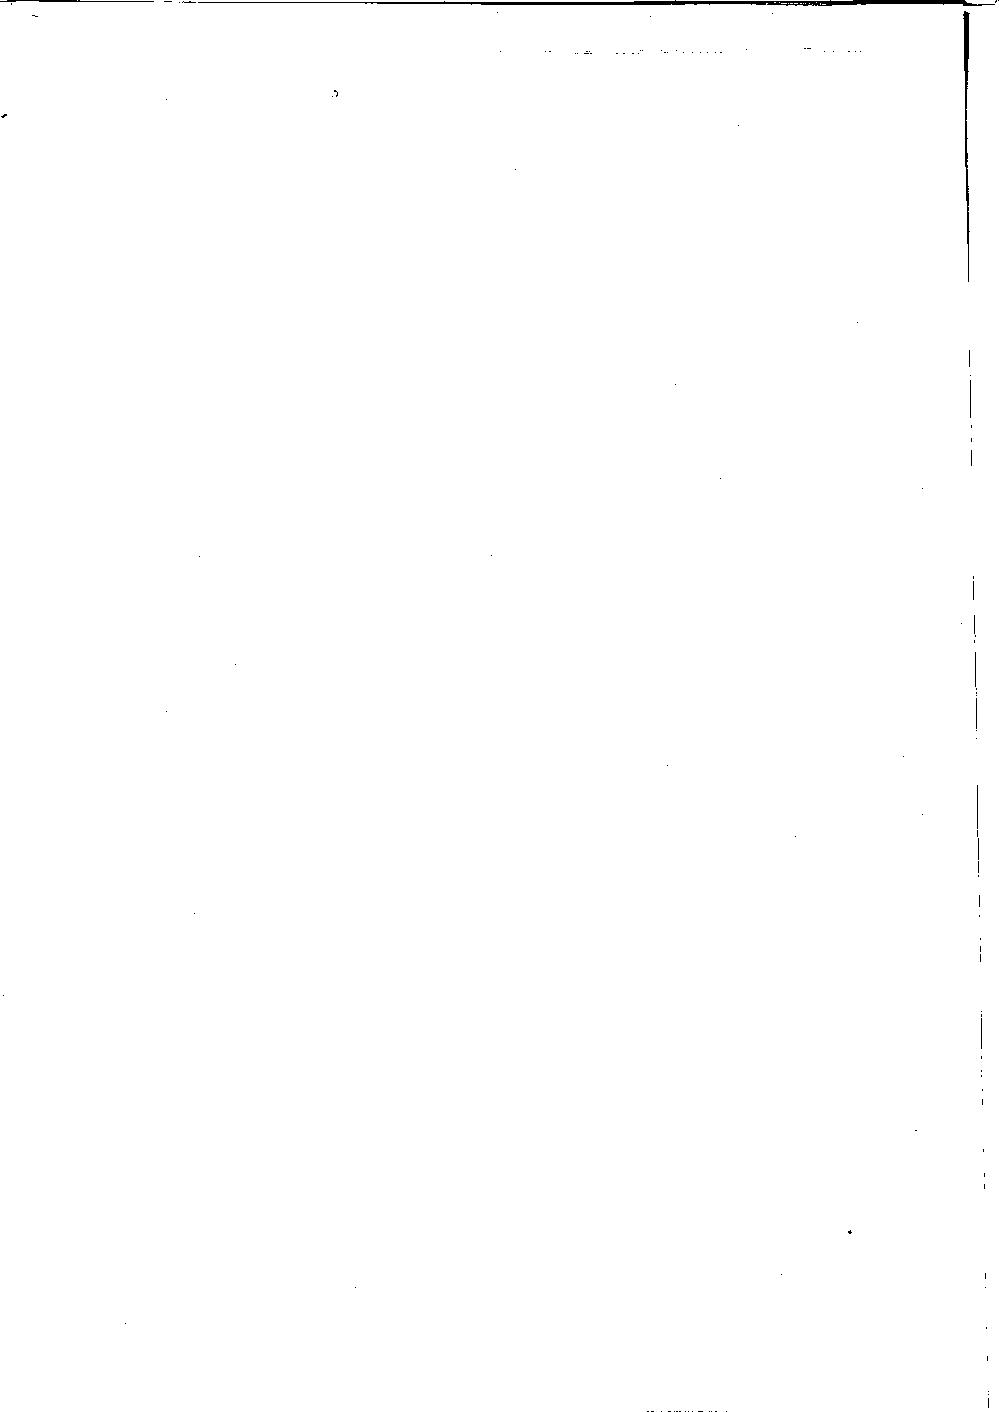 Scan of page 554